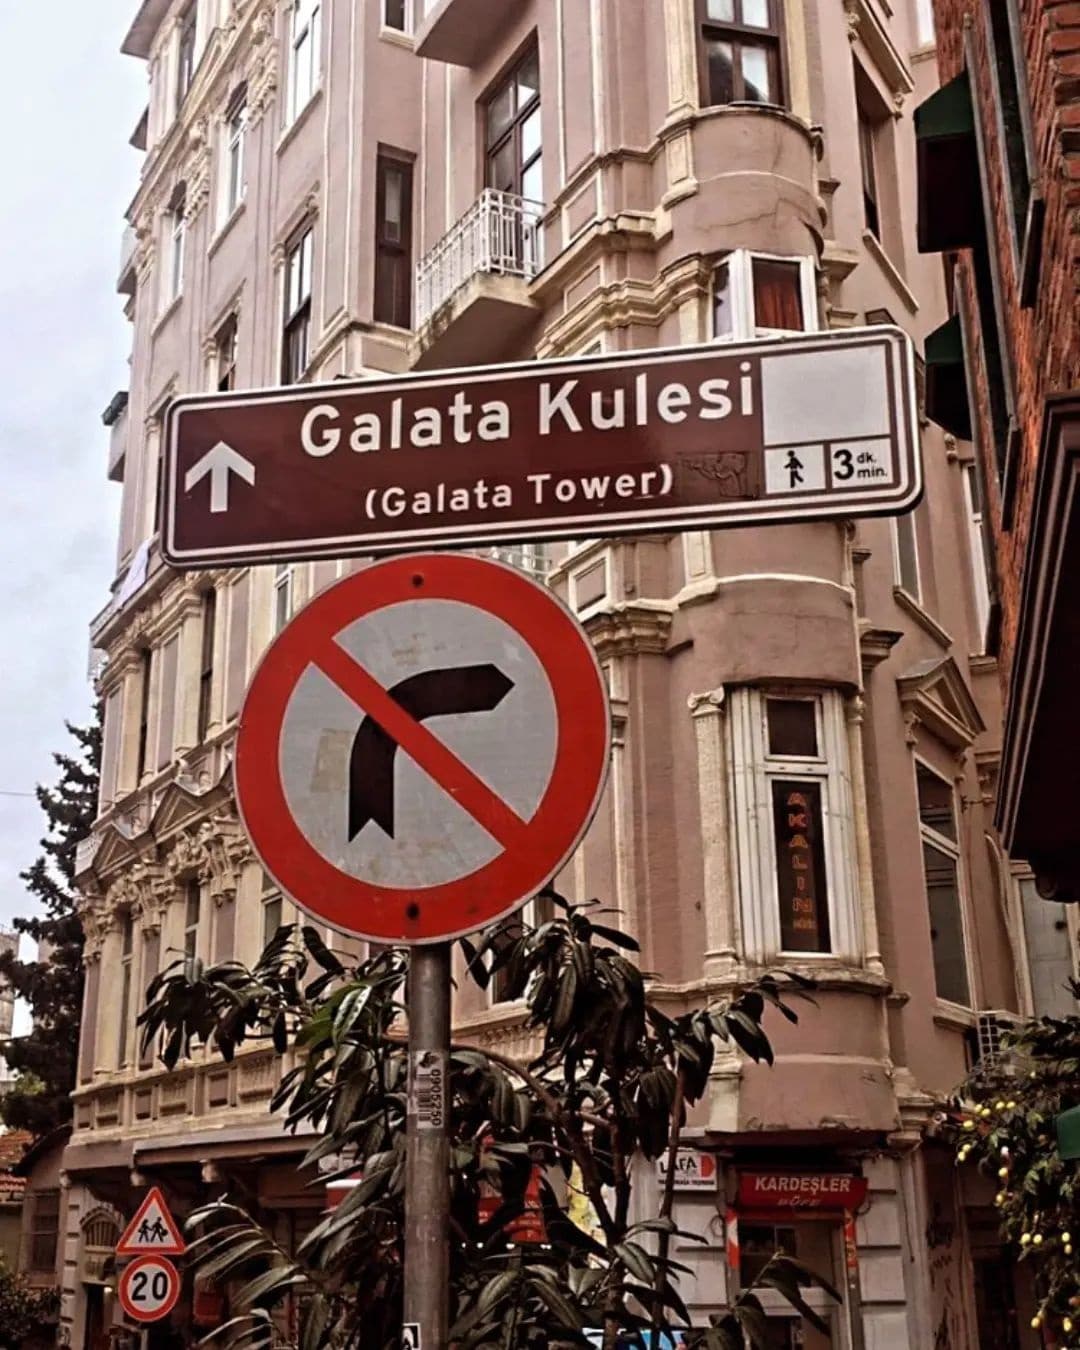 Where is the Galata Tower